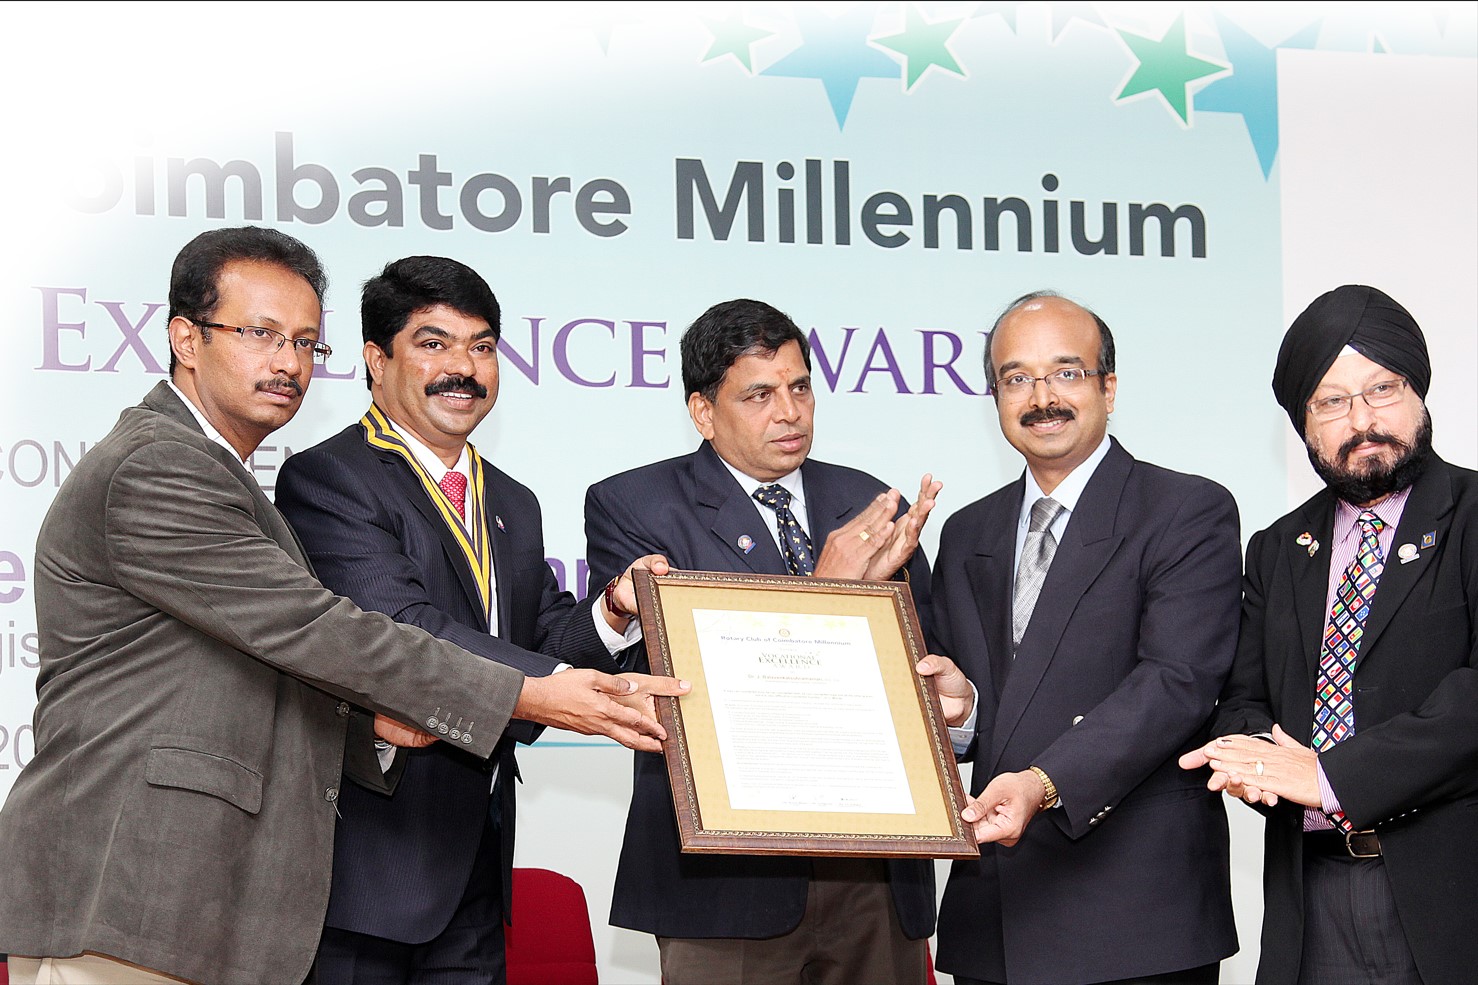 Vocational Excellence Award, Rotary Club of Coimbatore Millennium, 2011